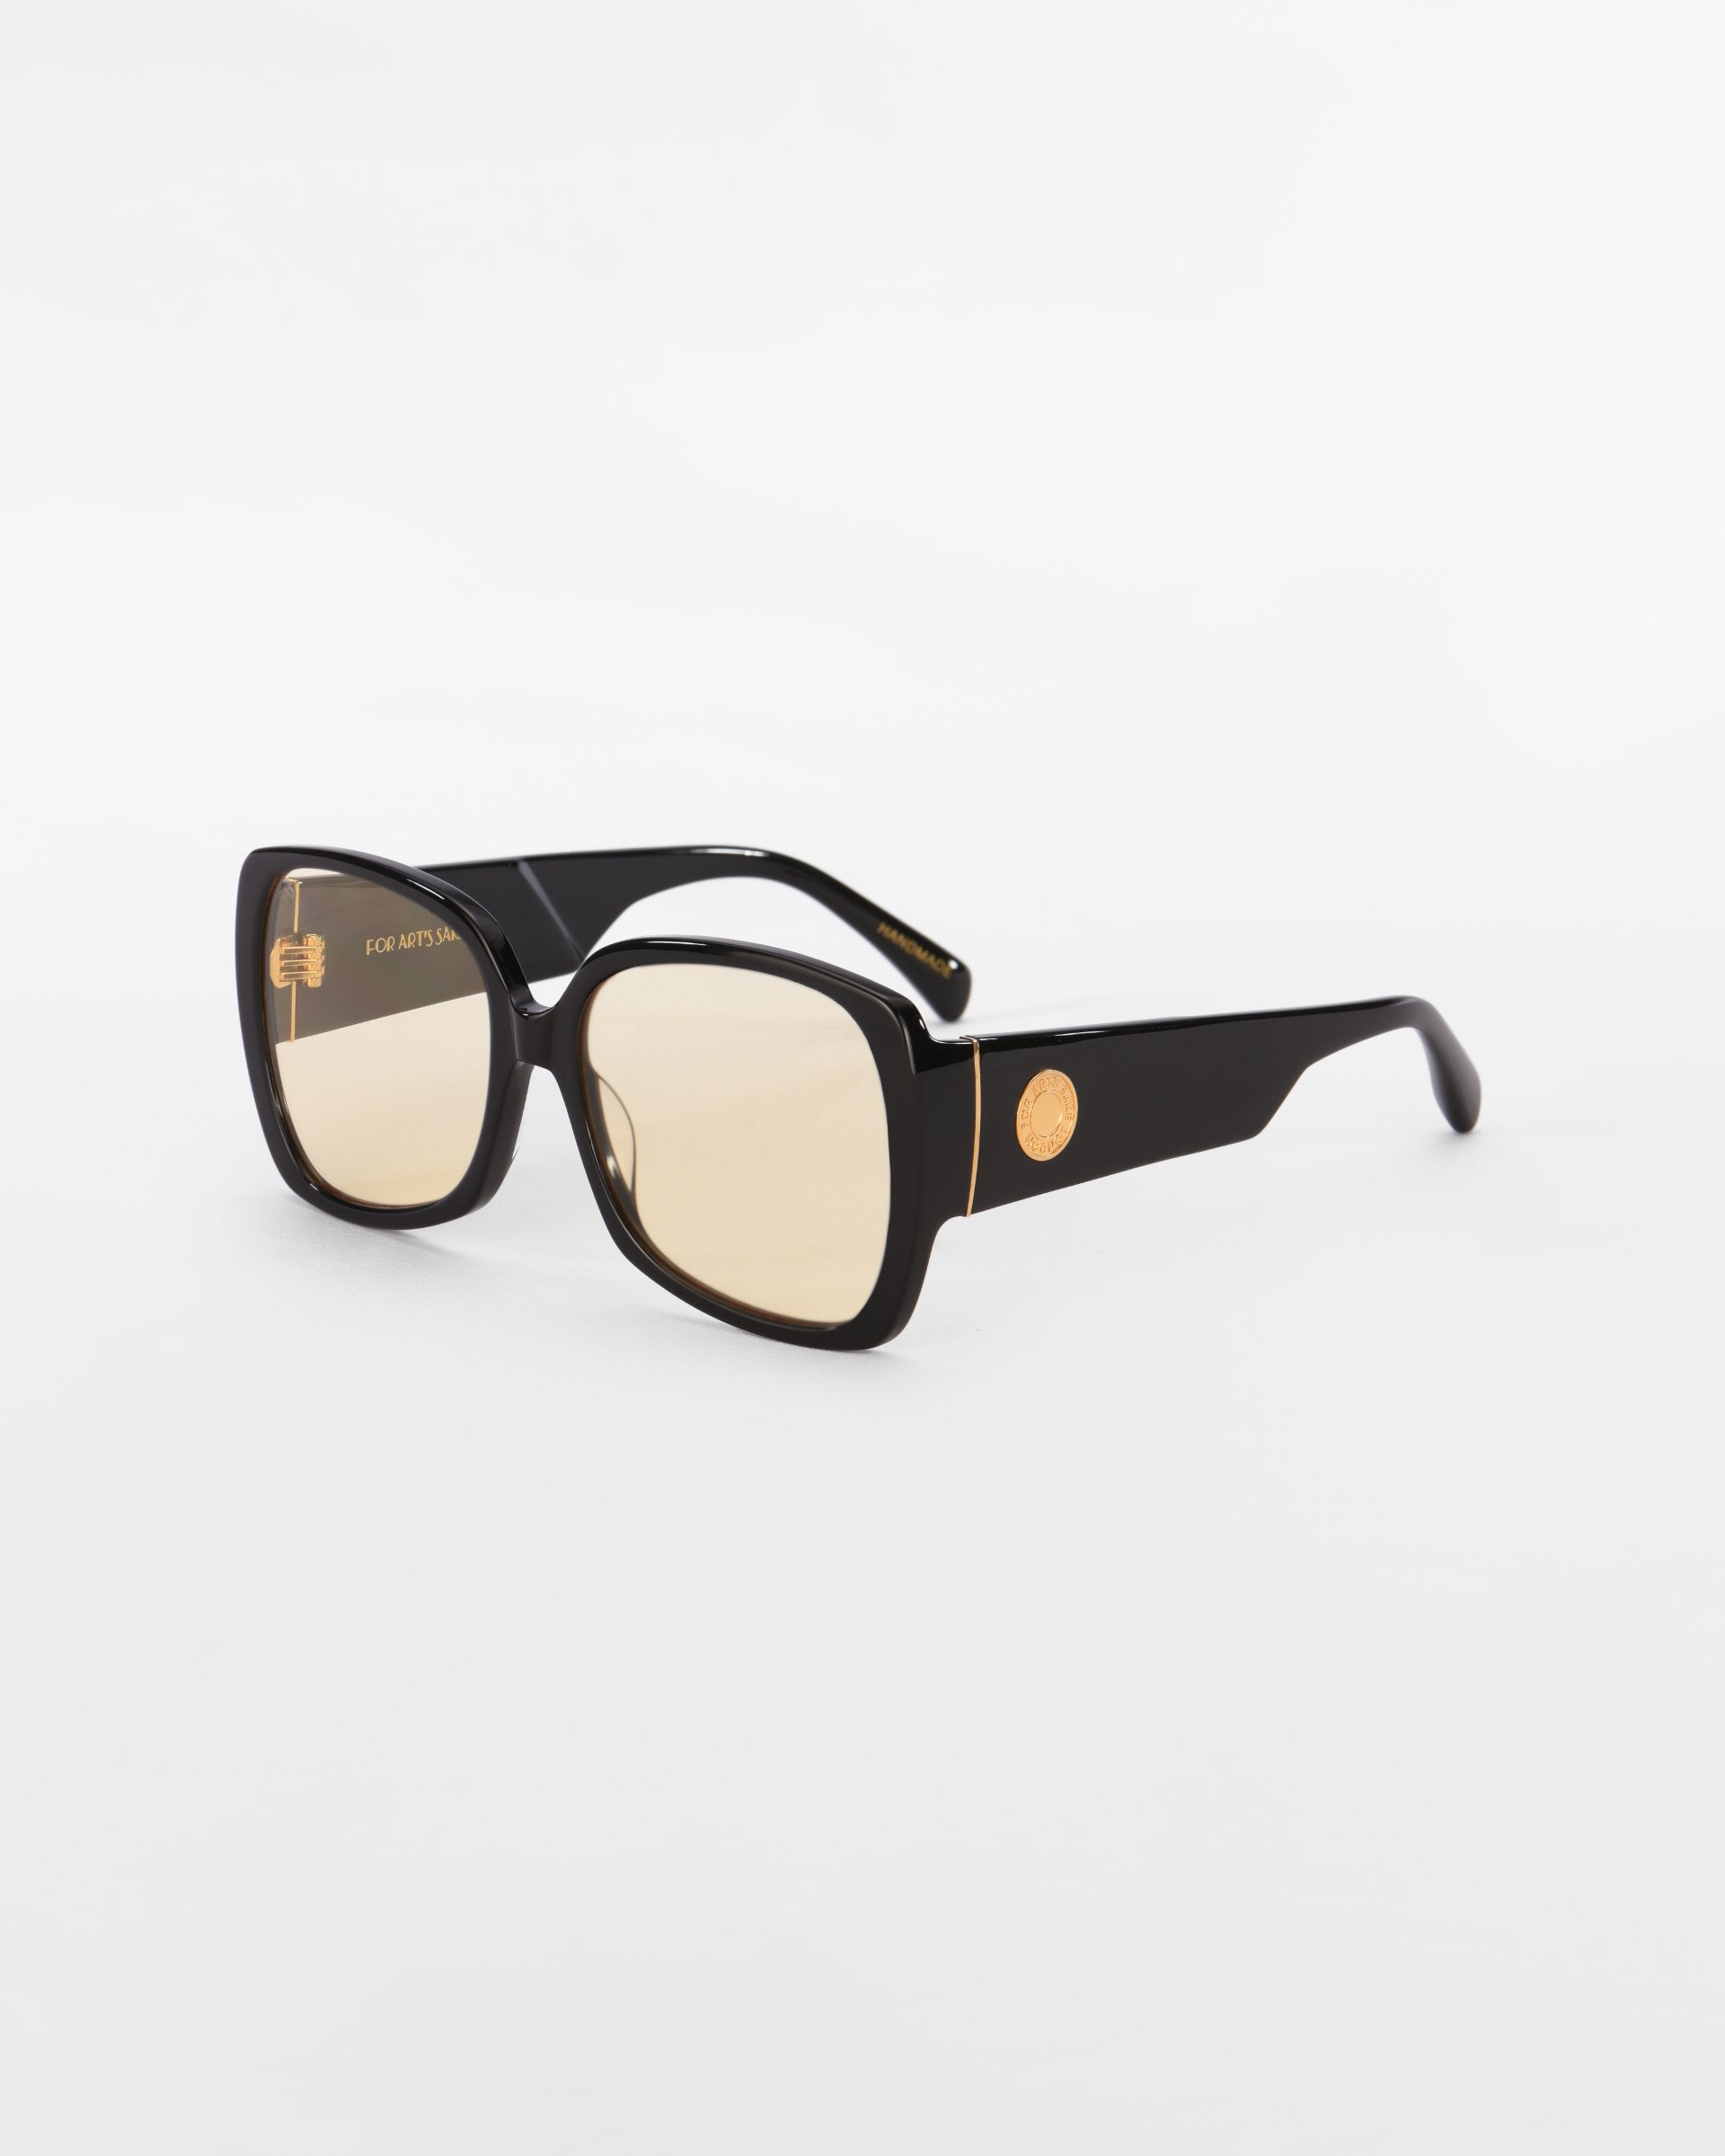 A pair of stylish, oversized black For Art's Sake® Odyssey sunglasses with rectangular lenses and gold accents on the temples, including a small emblem. The lightweight nylon lenses have a slight amber tint, complemented by 18-karat gold plating, and the background is plain white.